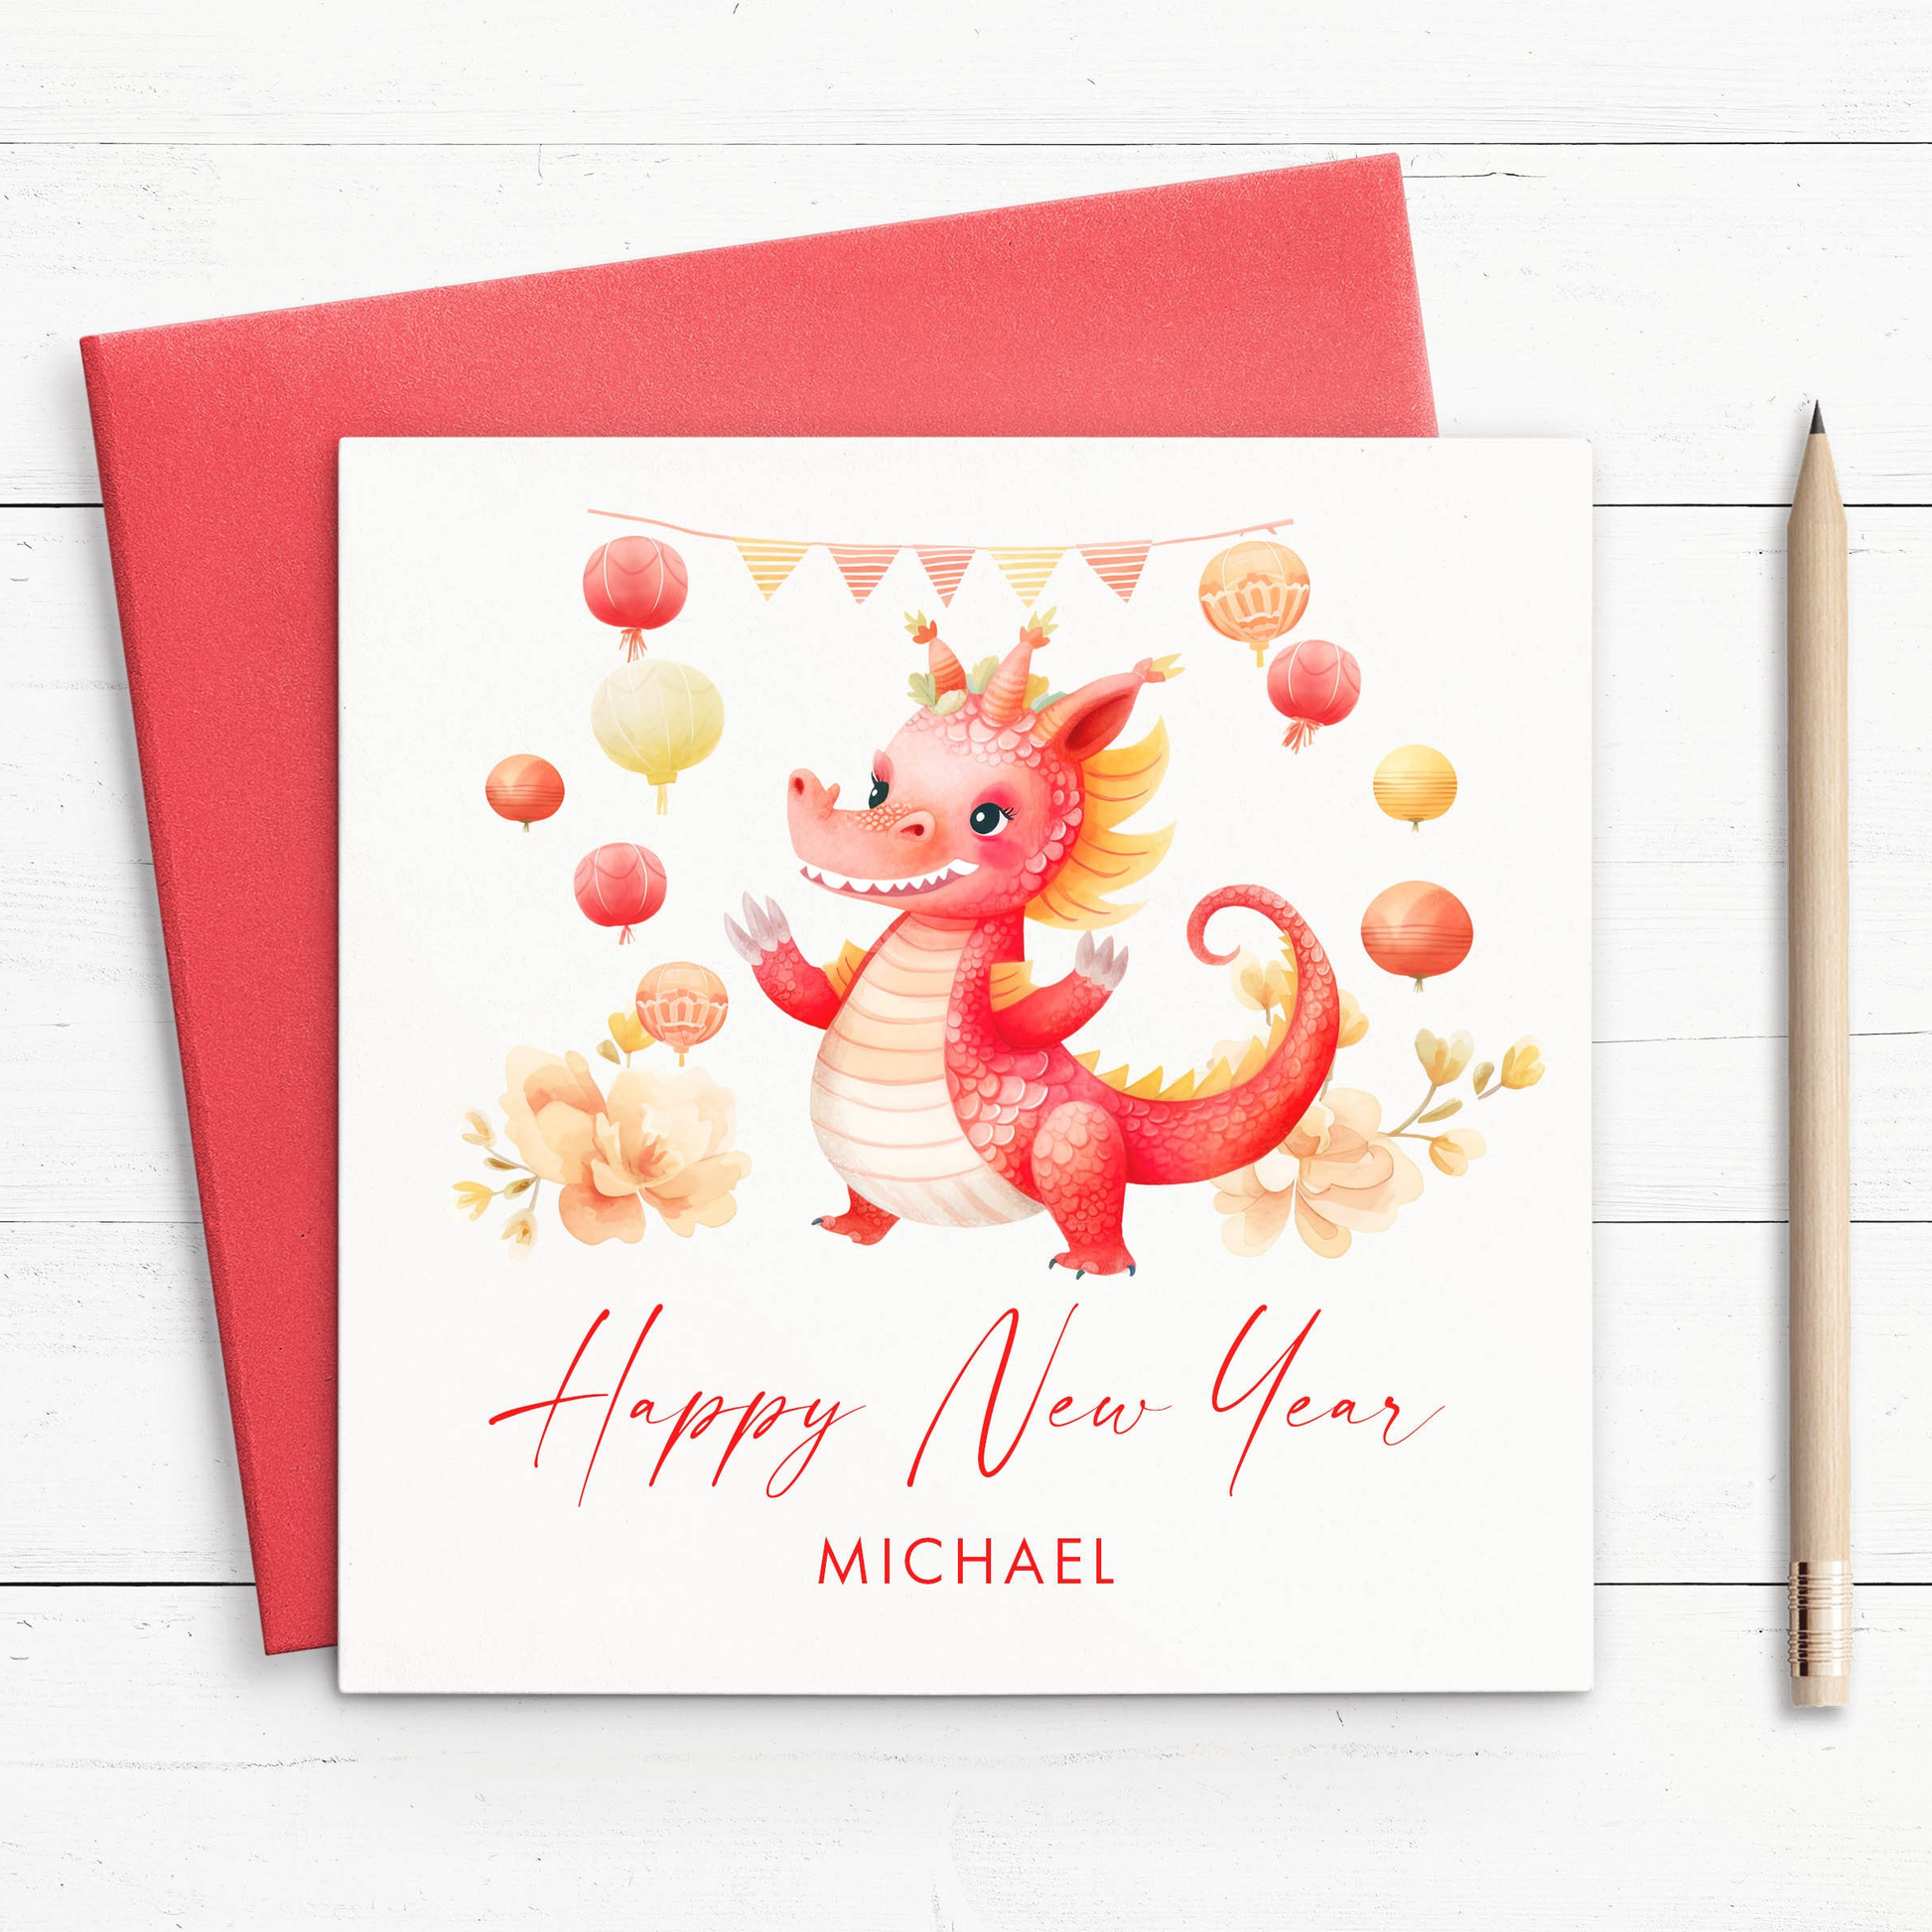 dragon happy chinese lunar new year card personalised white smooth matte cardstock red envelope